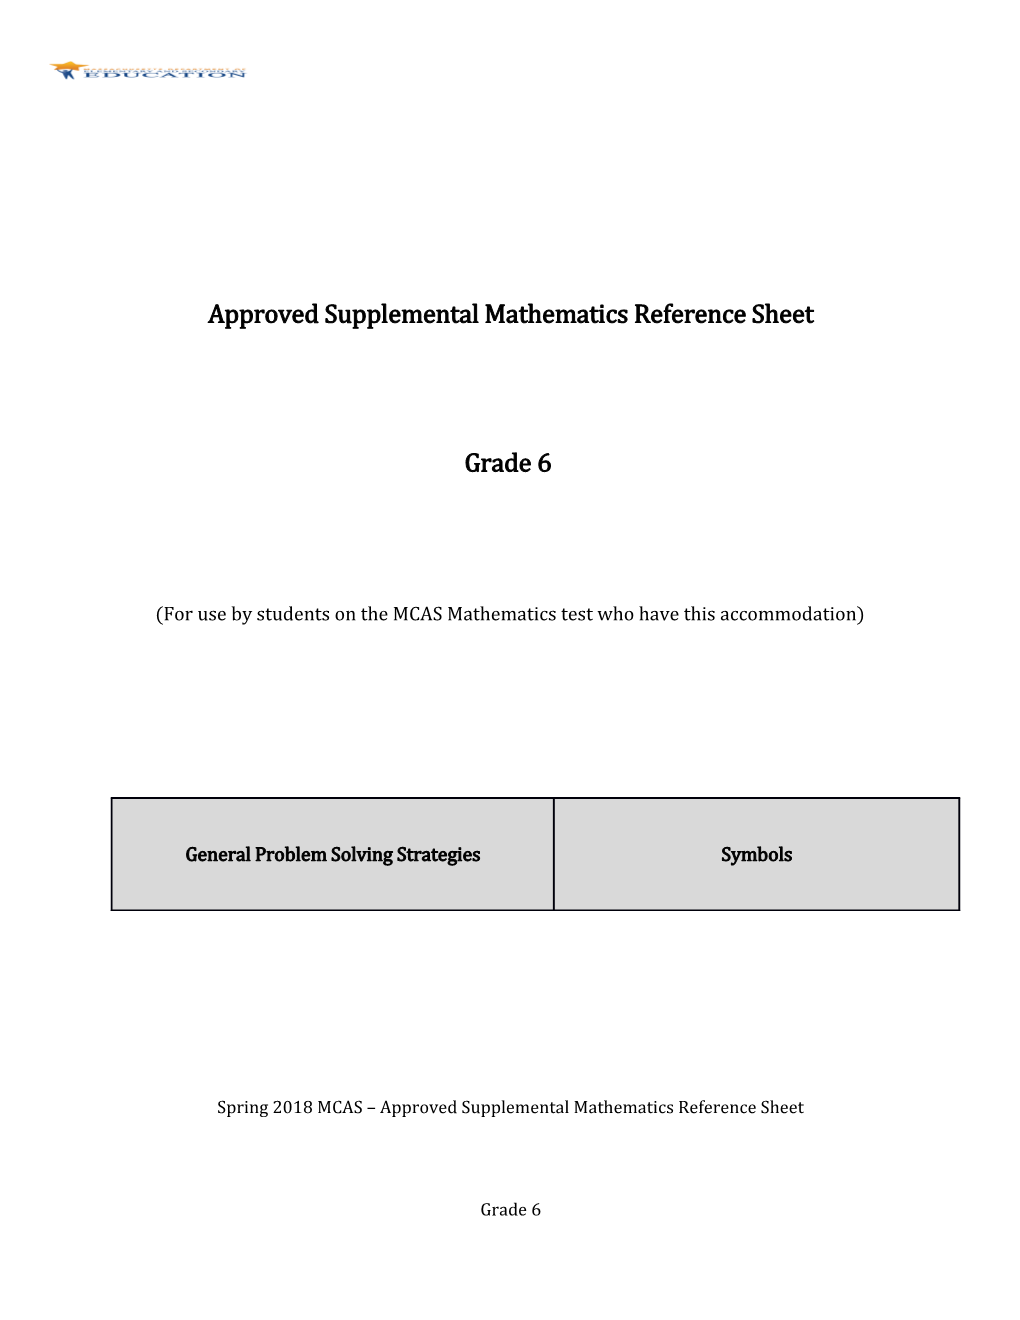 Grade 6 Approved Supplemental Math Reference Sheet 2017-2018